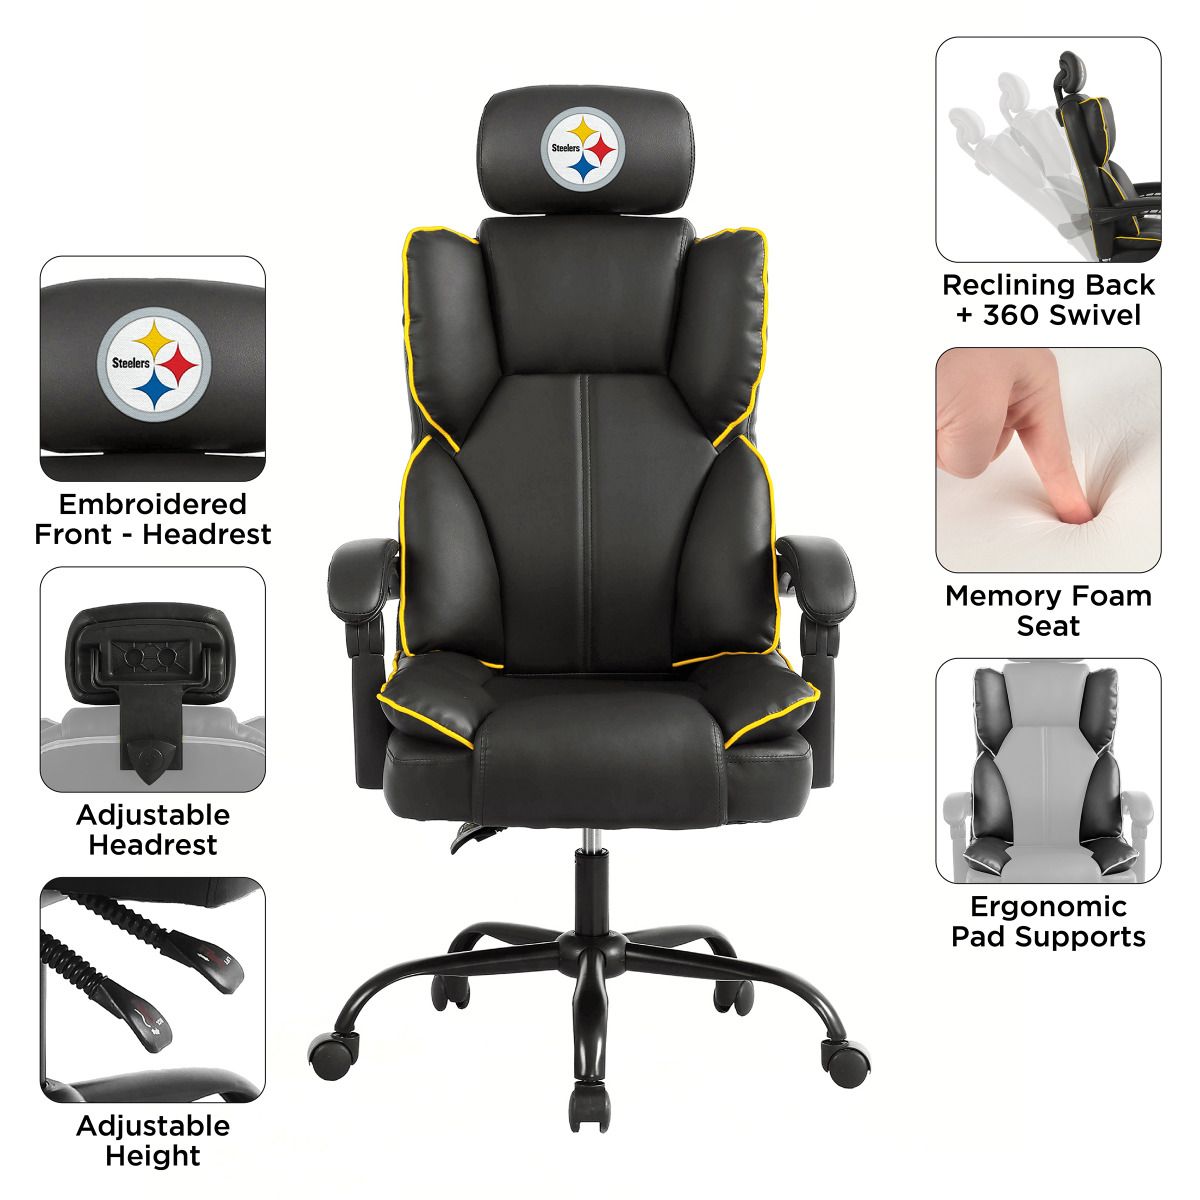 Imperial Pittsburgh Steelers Champ Chair